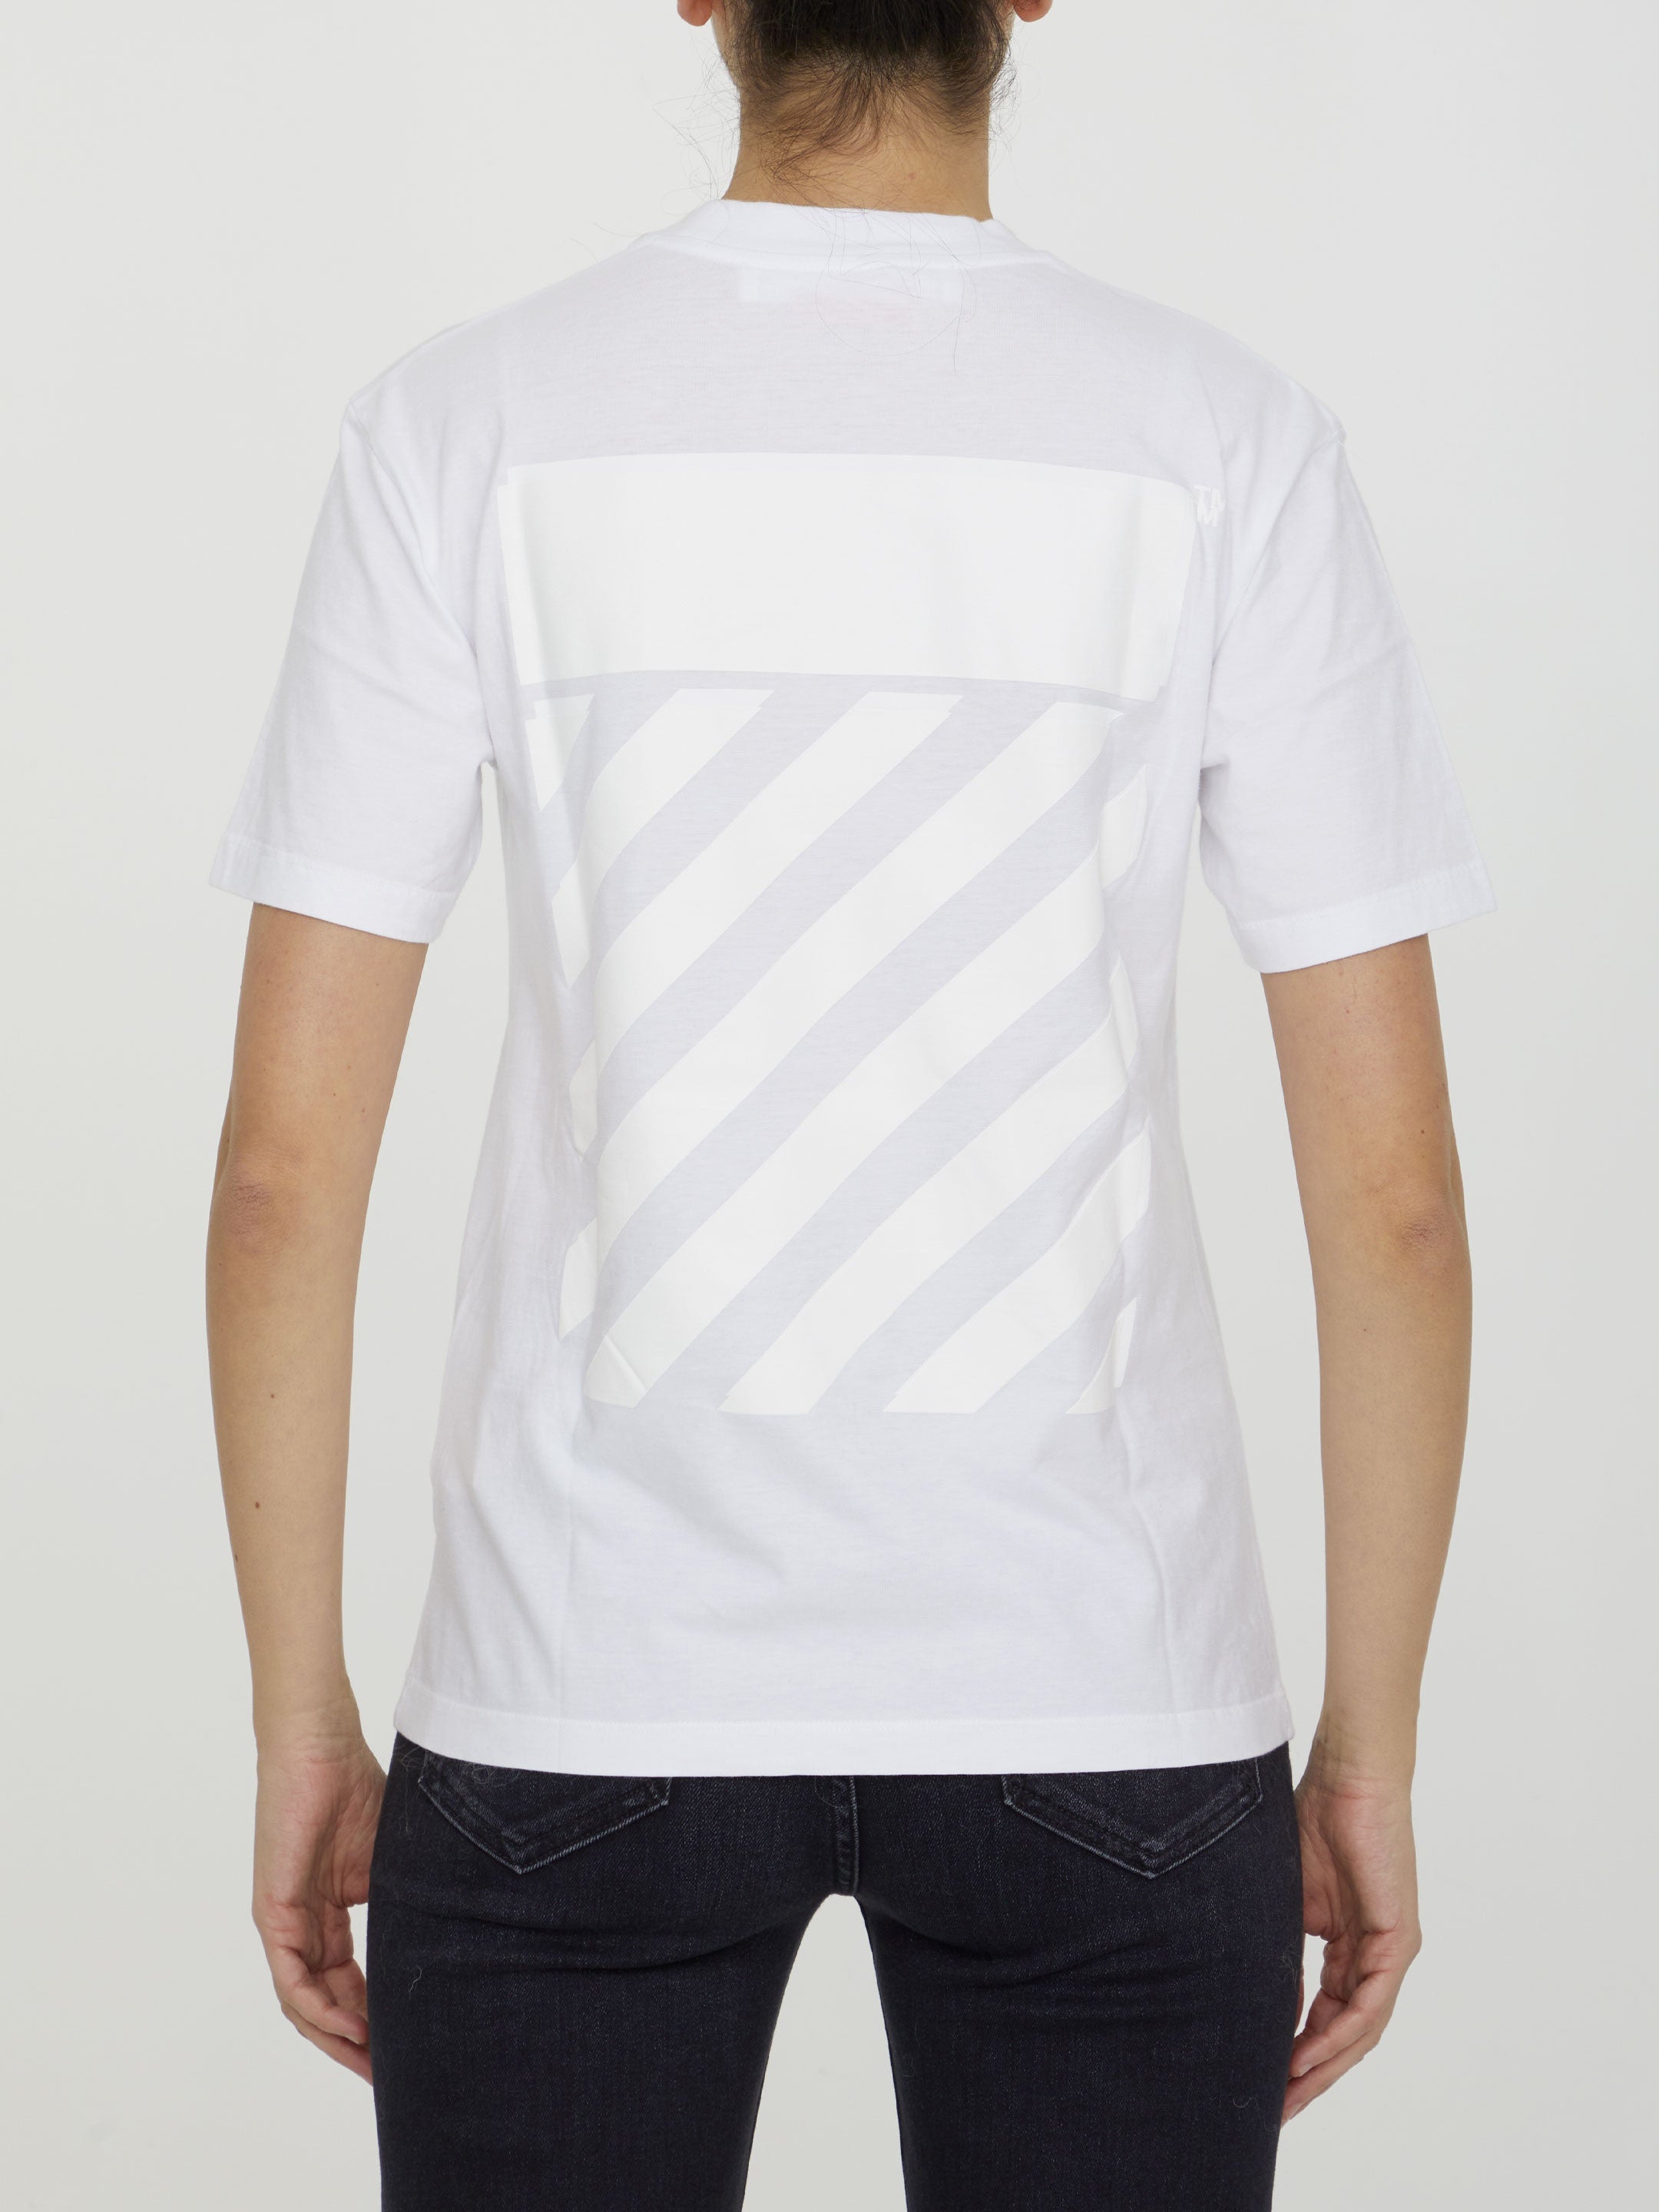 OFF-WHITE-OUTLET-SALE-Diag-print-t-shirt-Shirts-ARCHIVE-COLLECTION-4.jpg